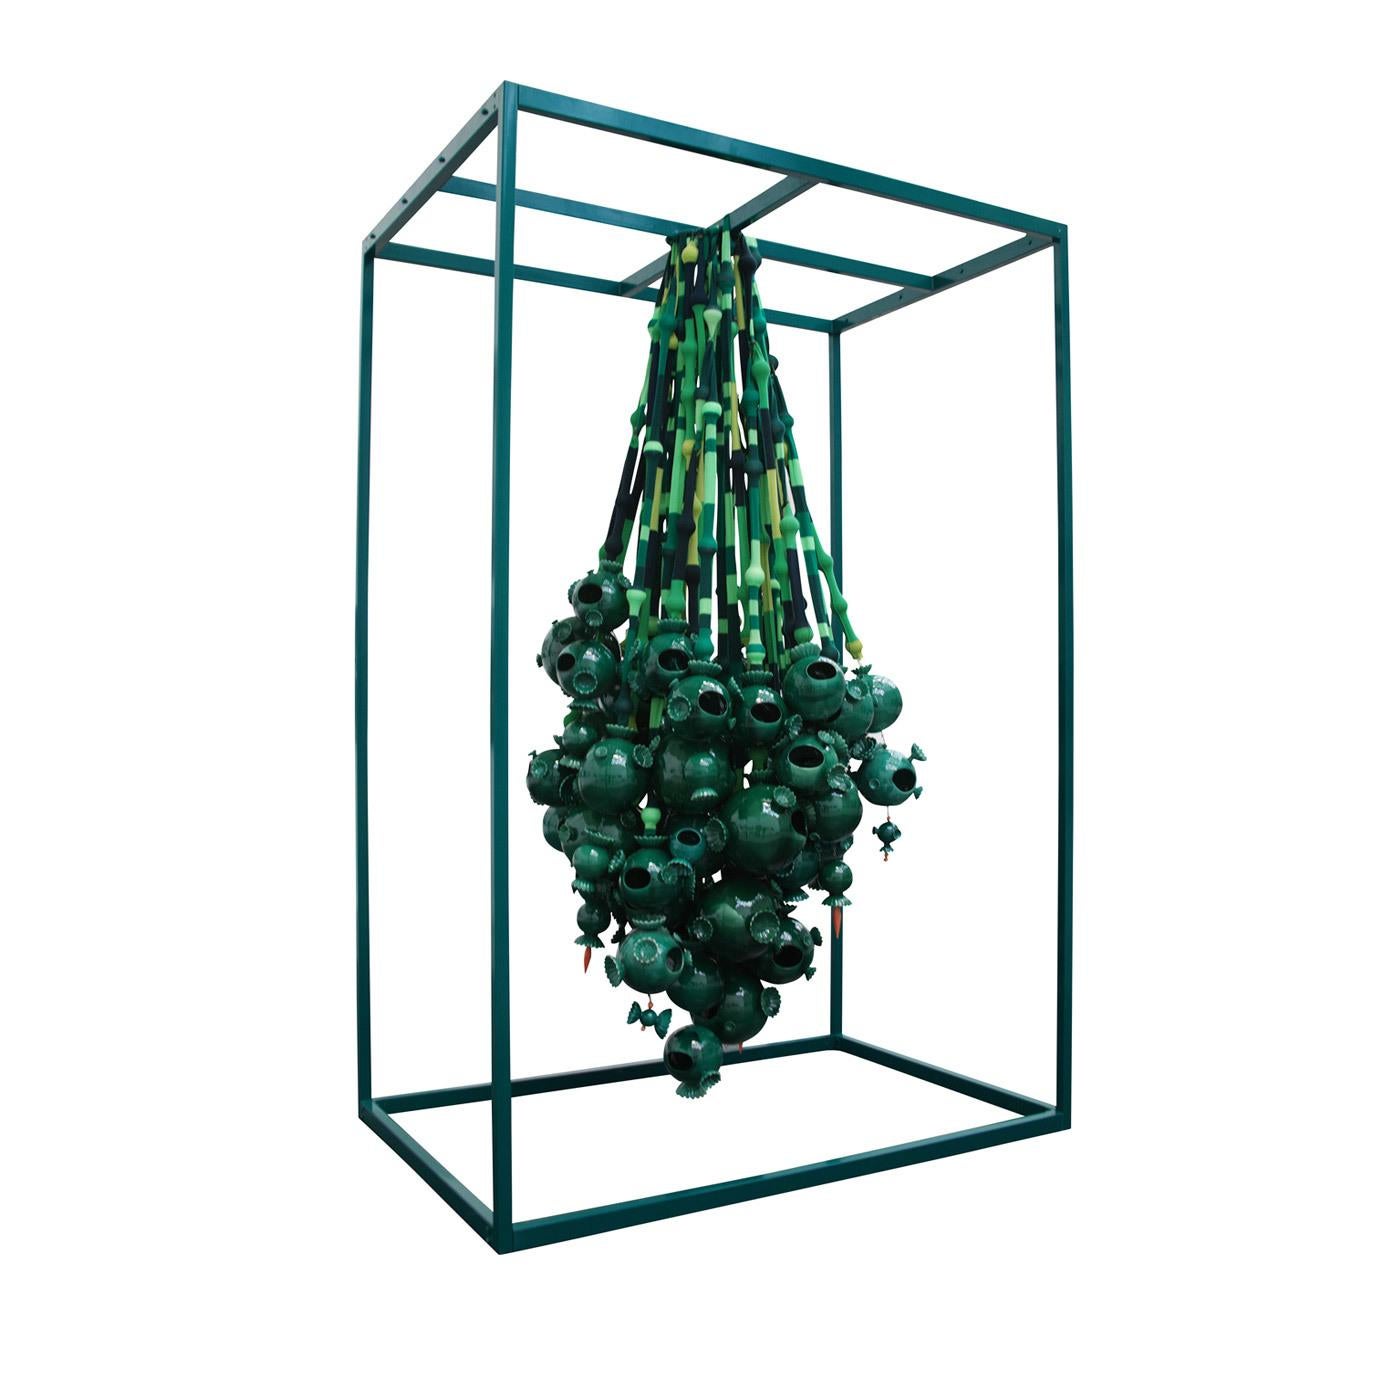 Green glazed ceramic shapes hang in descending spheres of different sizes upon suspended steel cables. Handcrafted flawlessly and customizable, this eccentric design object exemplifies the playful but elegant vision of Roberto Cambi and is suitable